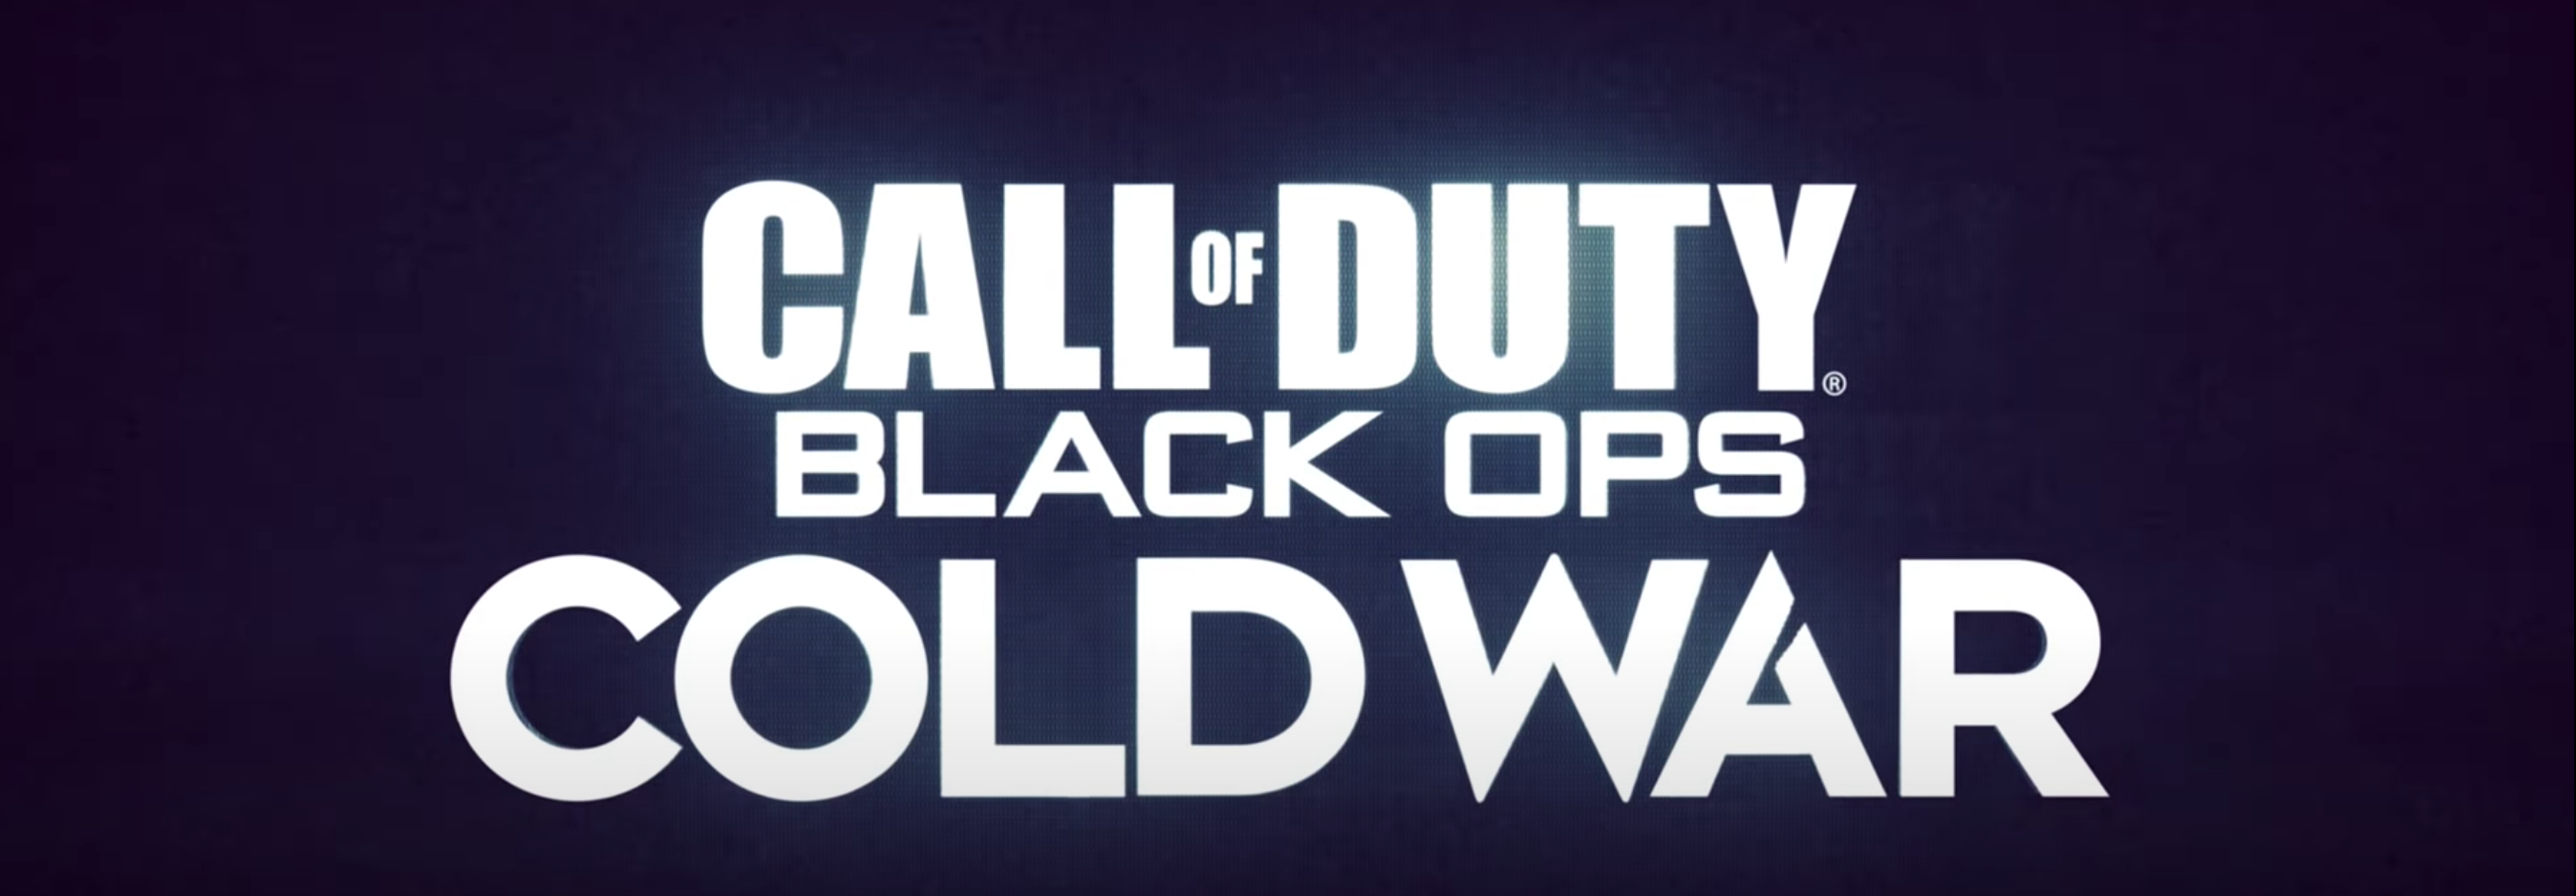 call of duty black ops cold war co op campaign